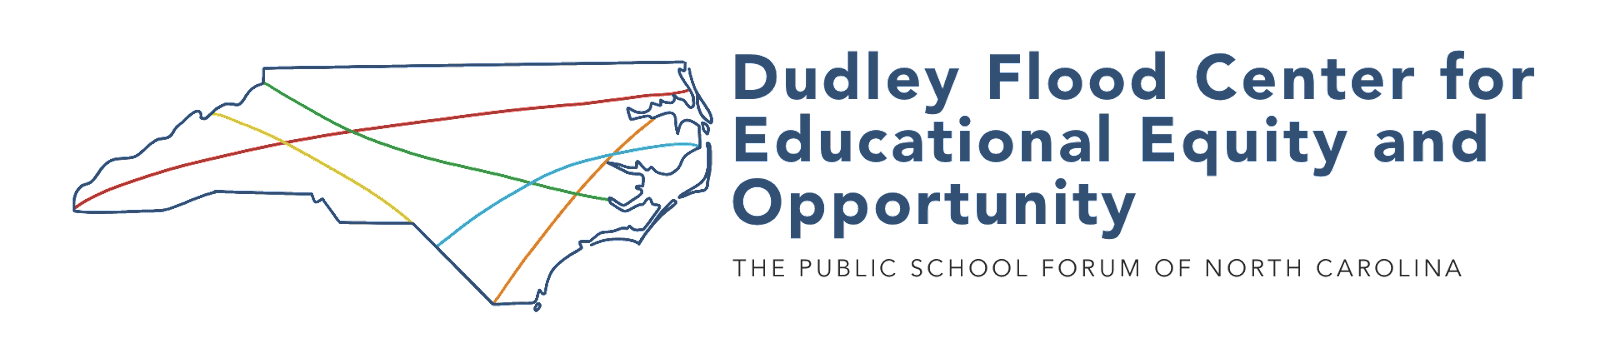 Dudley Flood Center for Educational Equity & Opportunity logo